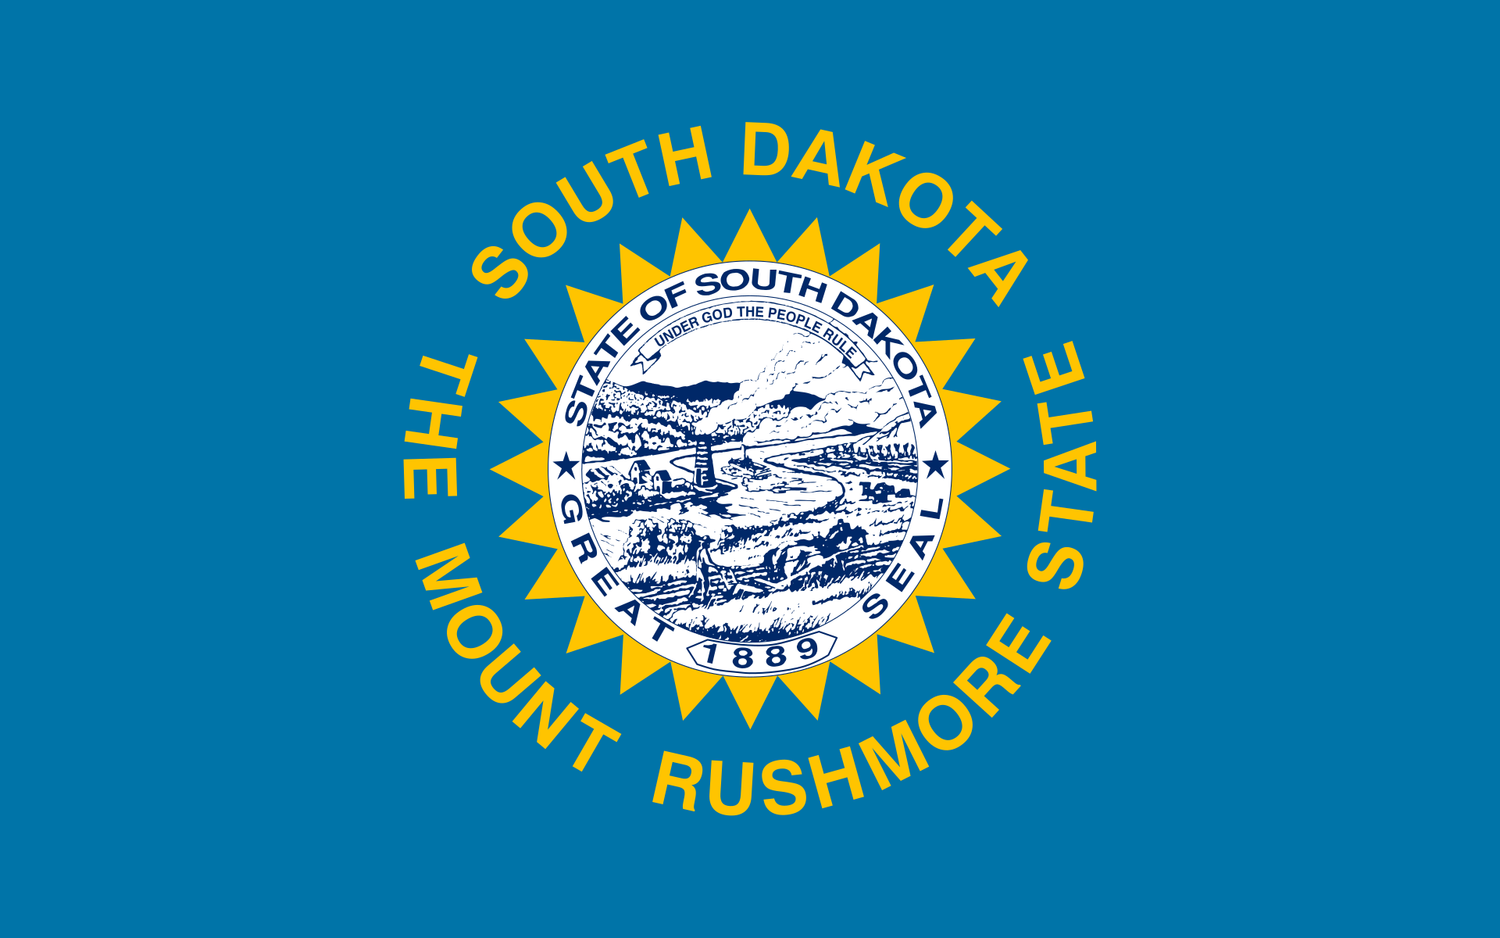 The official state flag of South Dakota was adopted in 1992 and showcases a sky blue field with a version of the state seal in the center, surrounded by gold triangles. - History By Mail